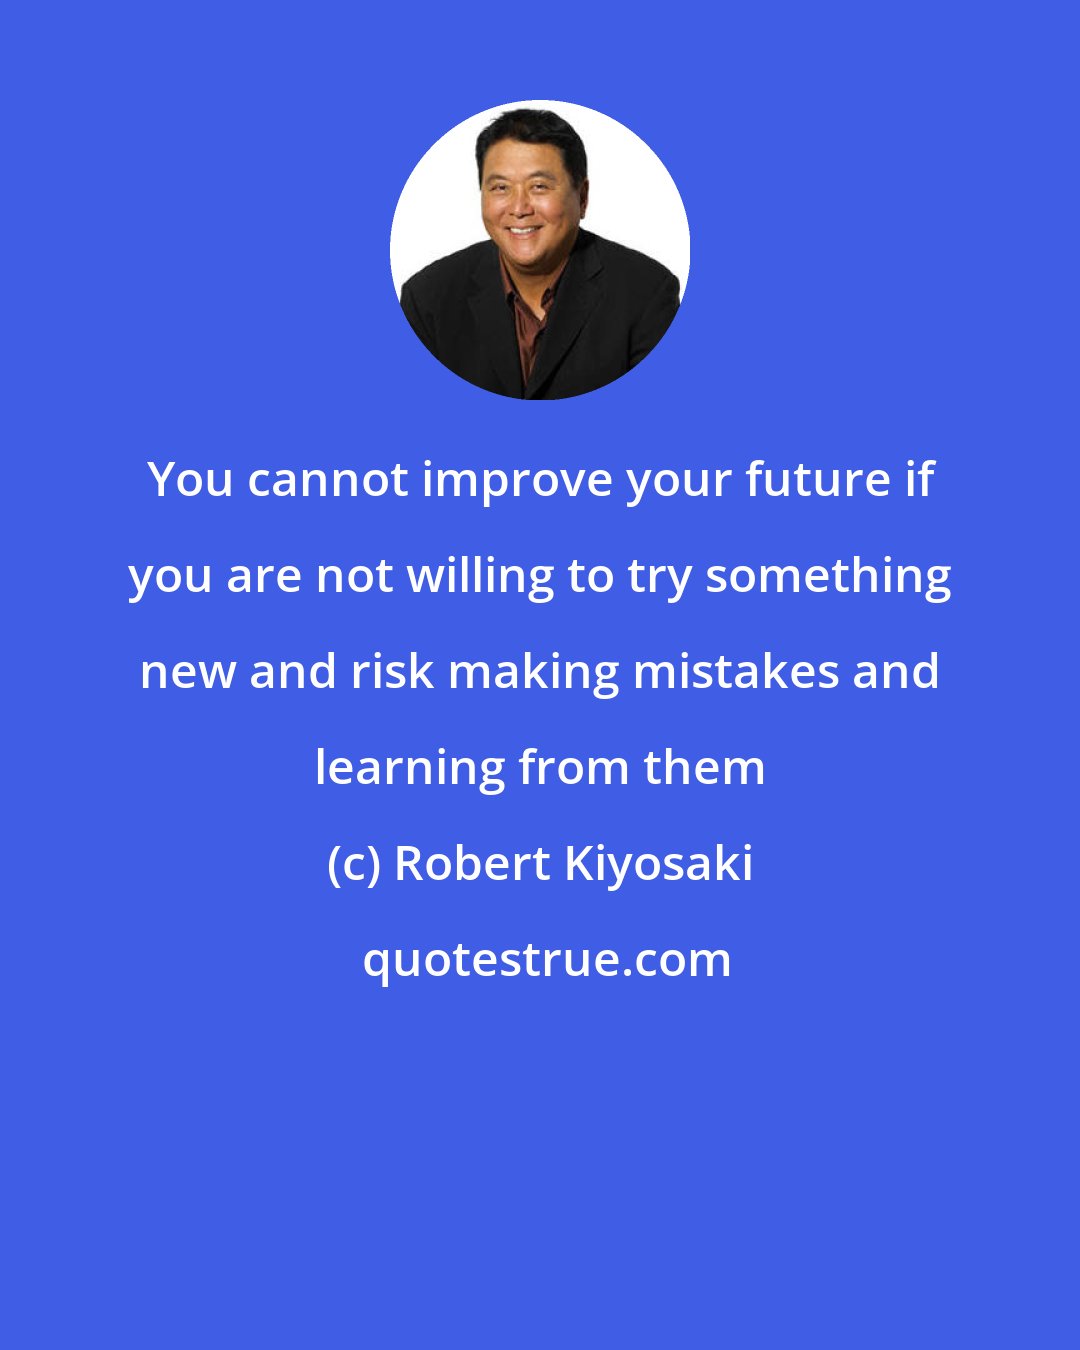 Robert Kiyosaki: You cannot improve your future if you are not willing to try something new and risk making mistakes and learning from them